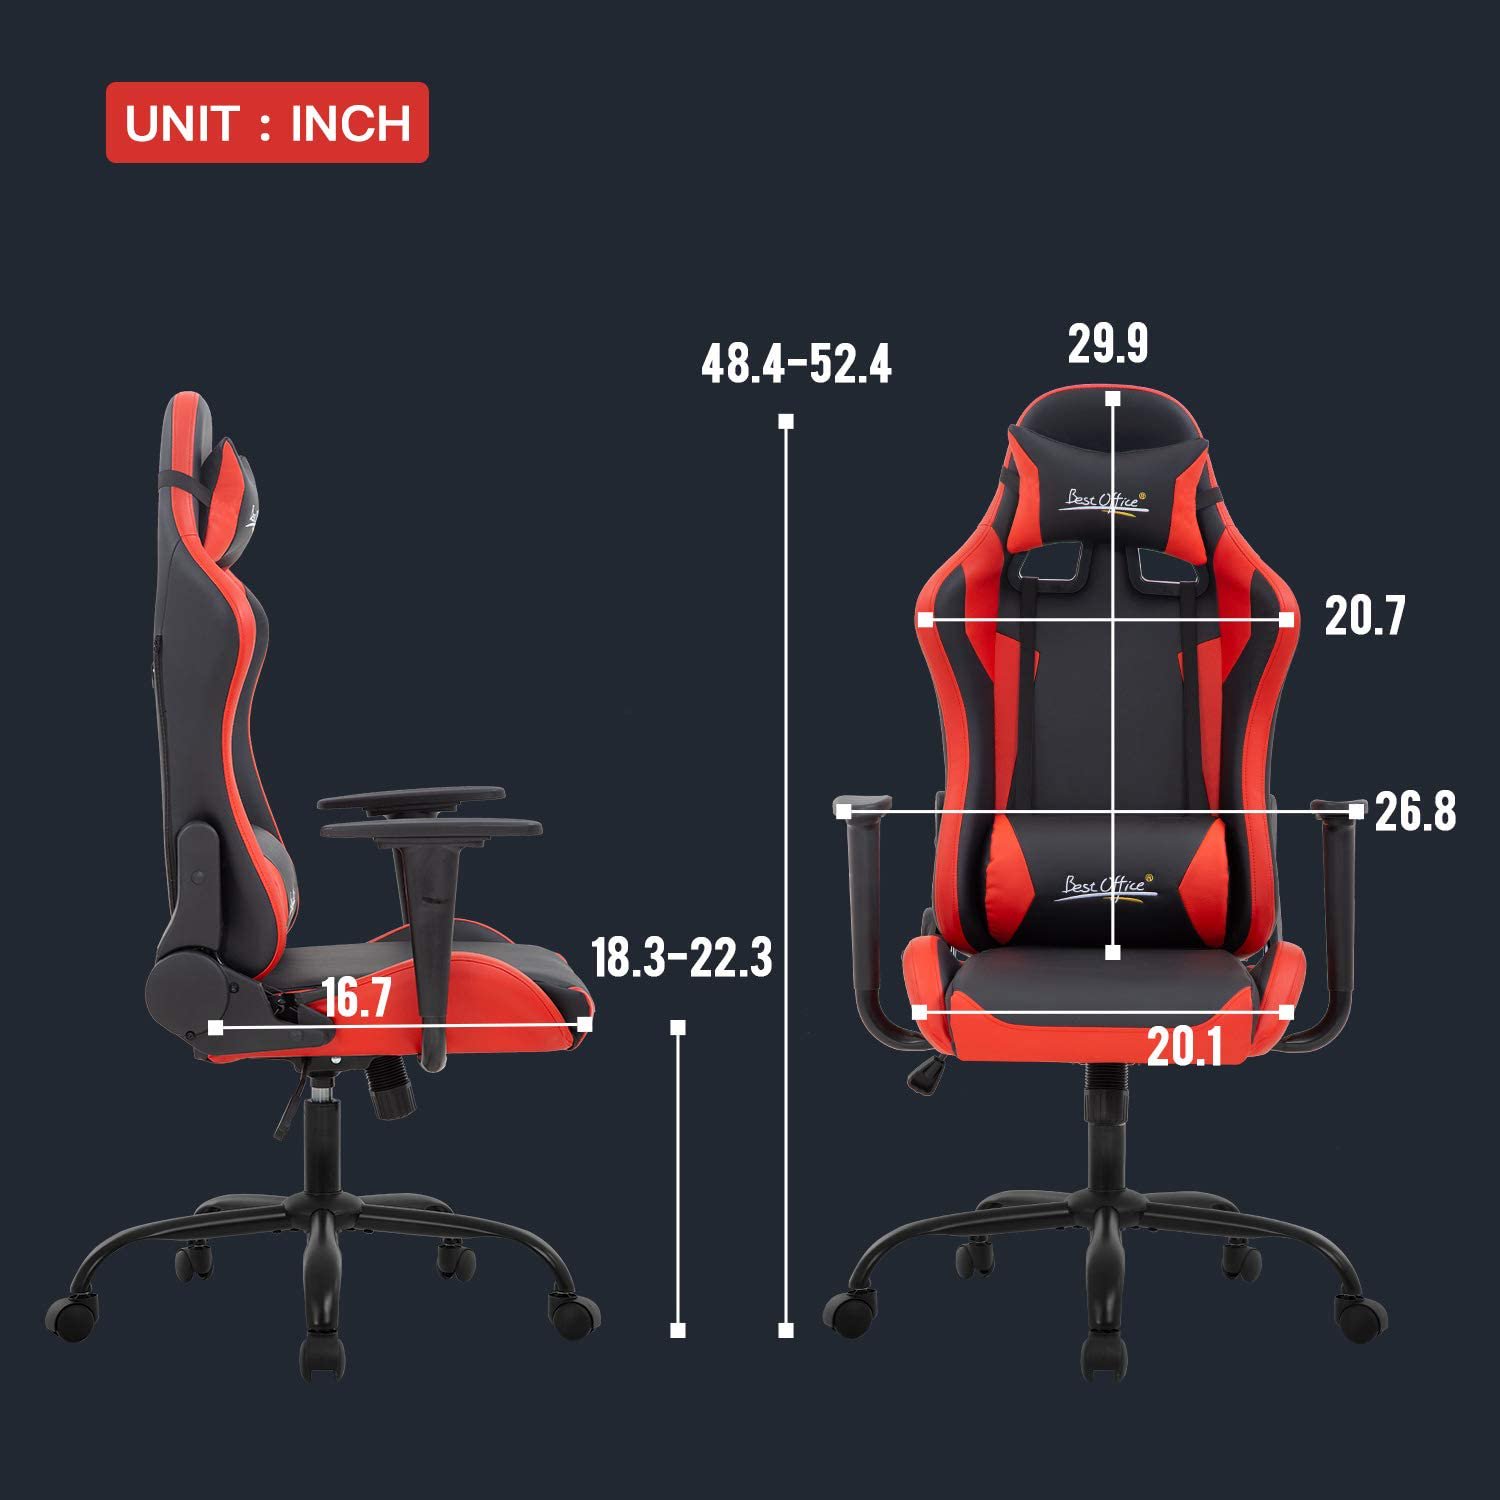 https://themarketdepot.com/wp-content/uploads/2023/01/PC-Gaming-Chair-Racing-Chair-Ergonomic-Computer-Chair-with-Lumbar-Support-Headrest-Armrest-Task-Rolling-Swivel-Desk-Chair-PU-Leather-E-Sports-Adjustable-Office-Chair-Red-5.jpeg